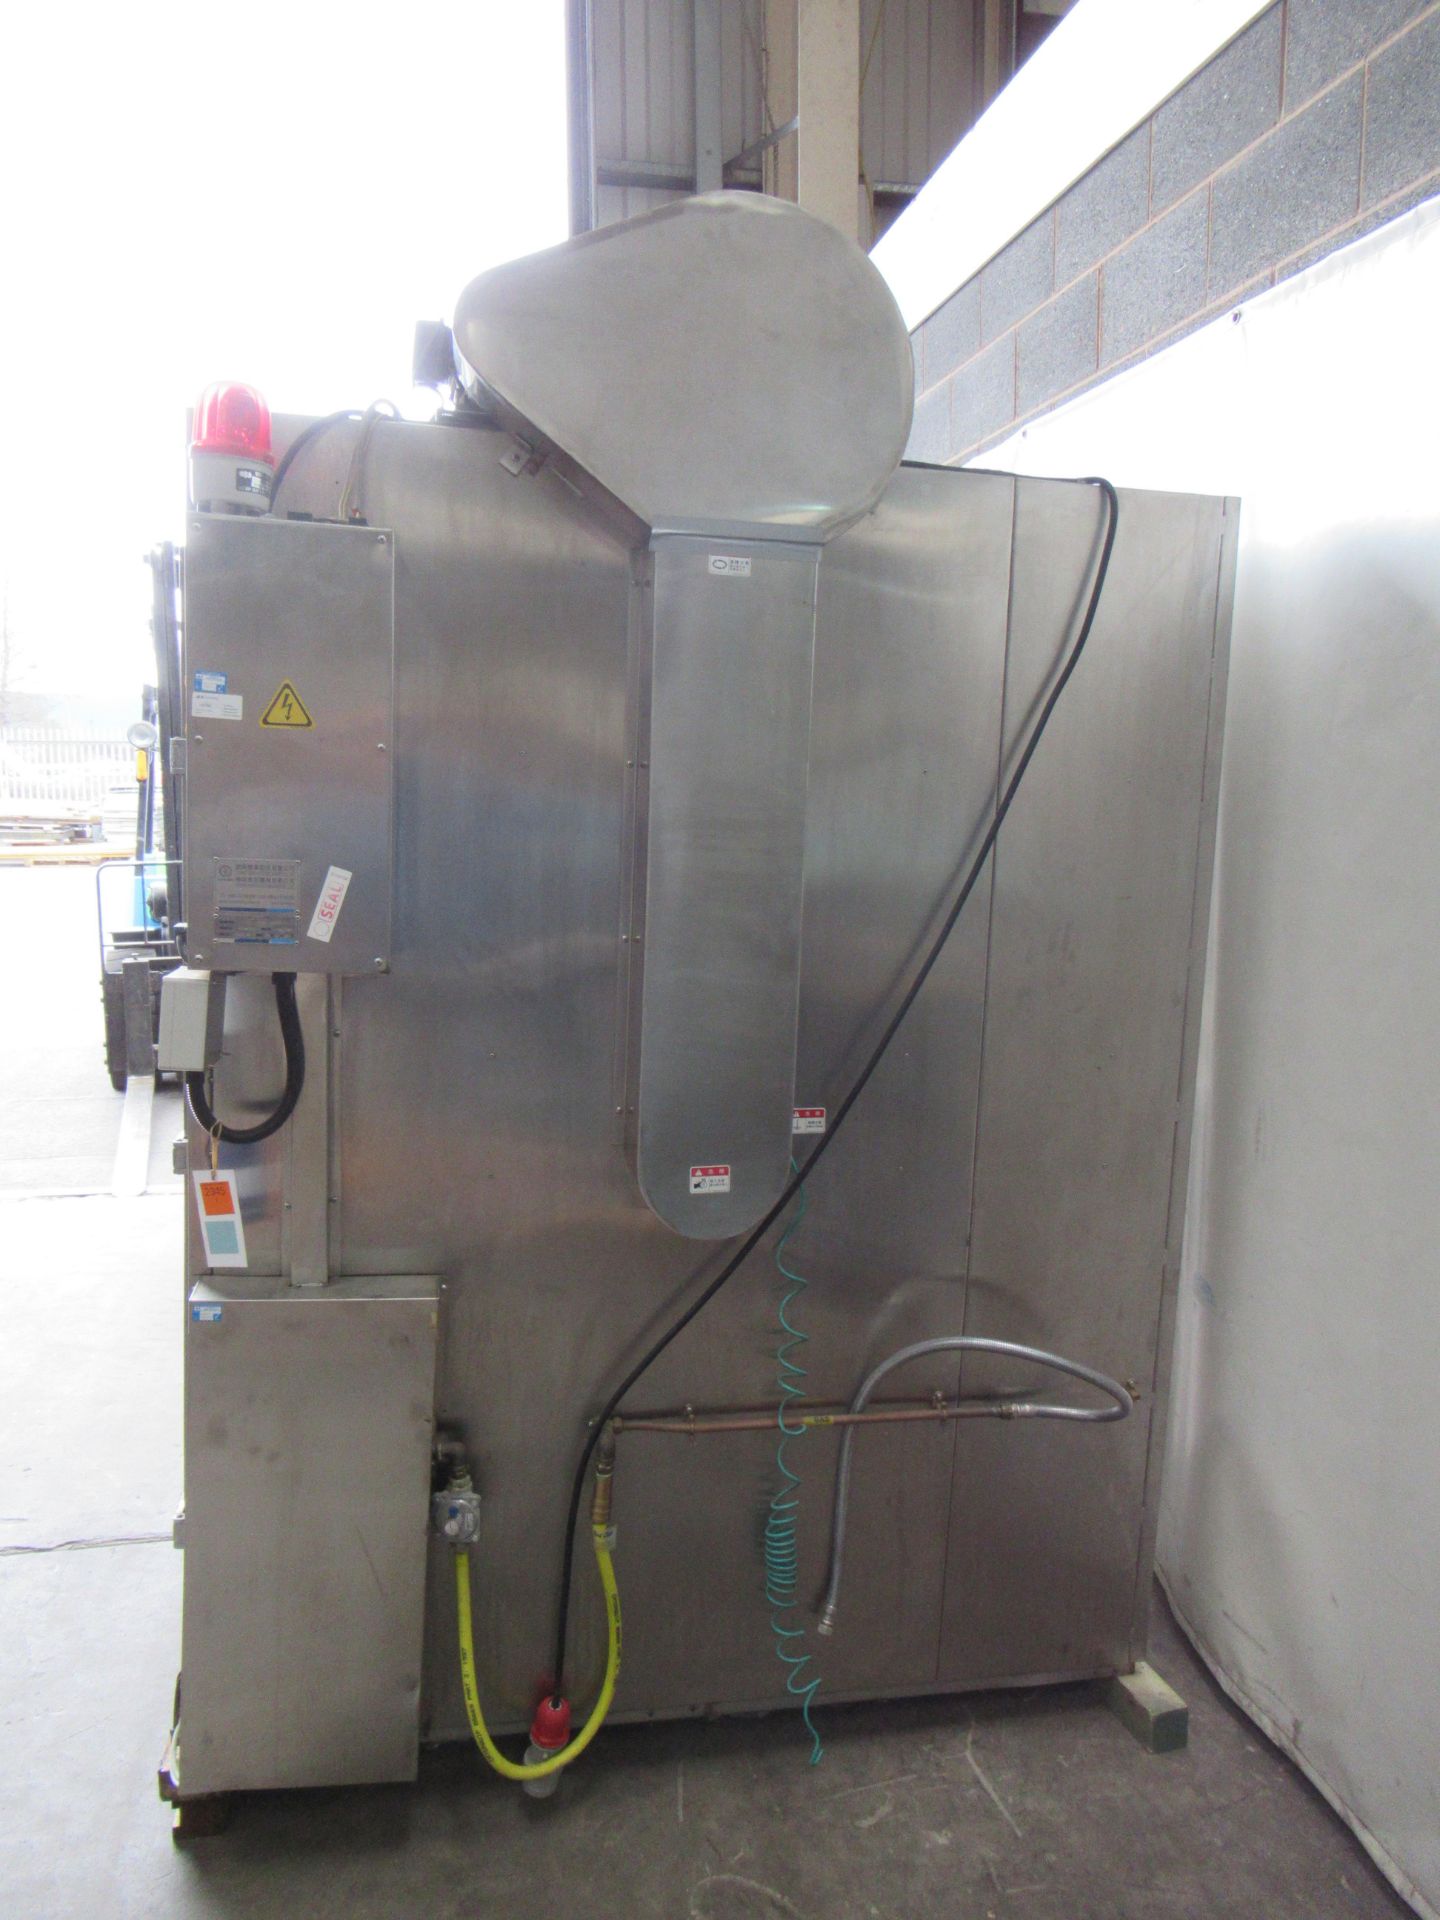 Tsung Hsing 'box type dryer' commercial oven/dryer with two trollies, 415V, 50Hz - Image 4 of 7